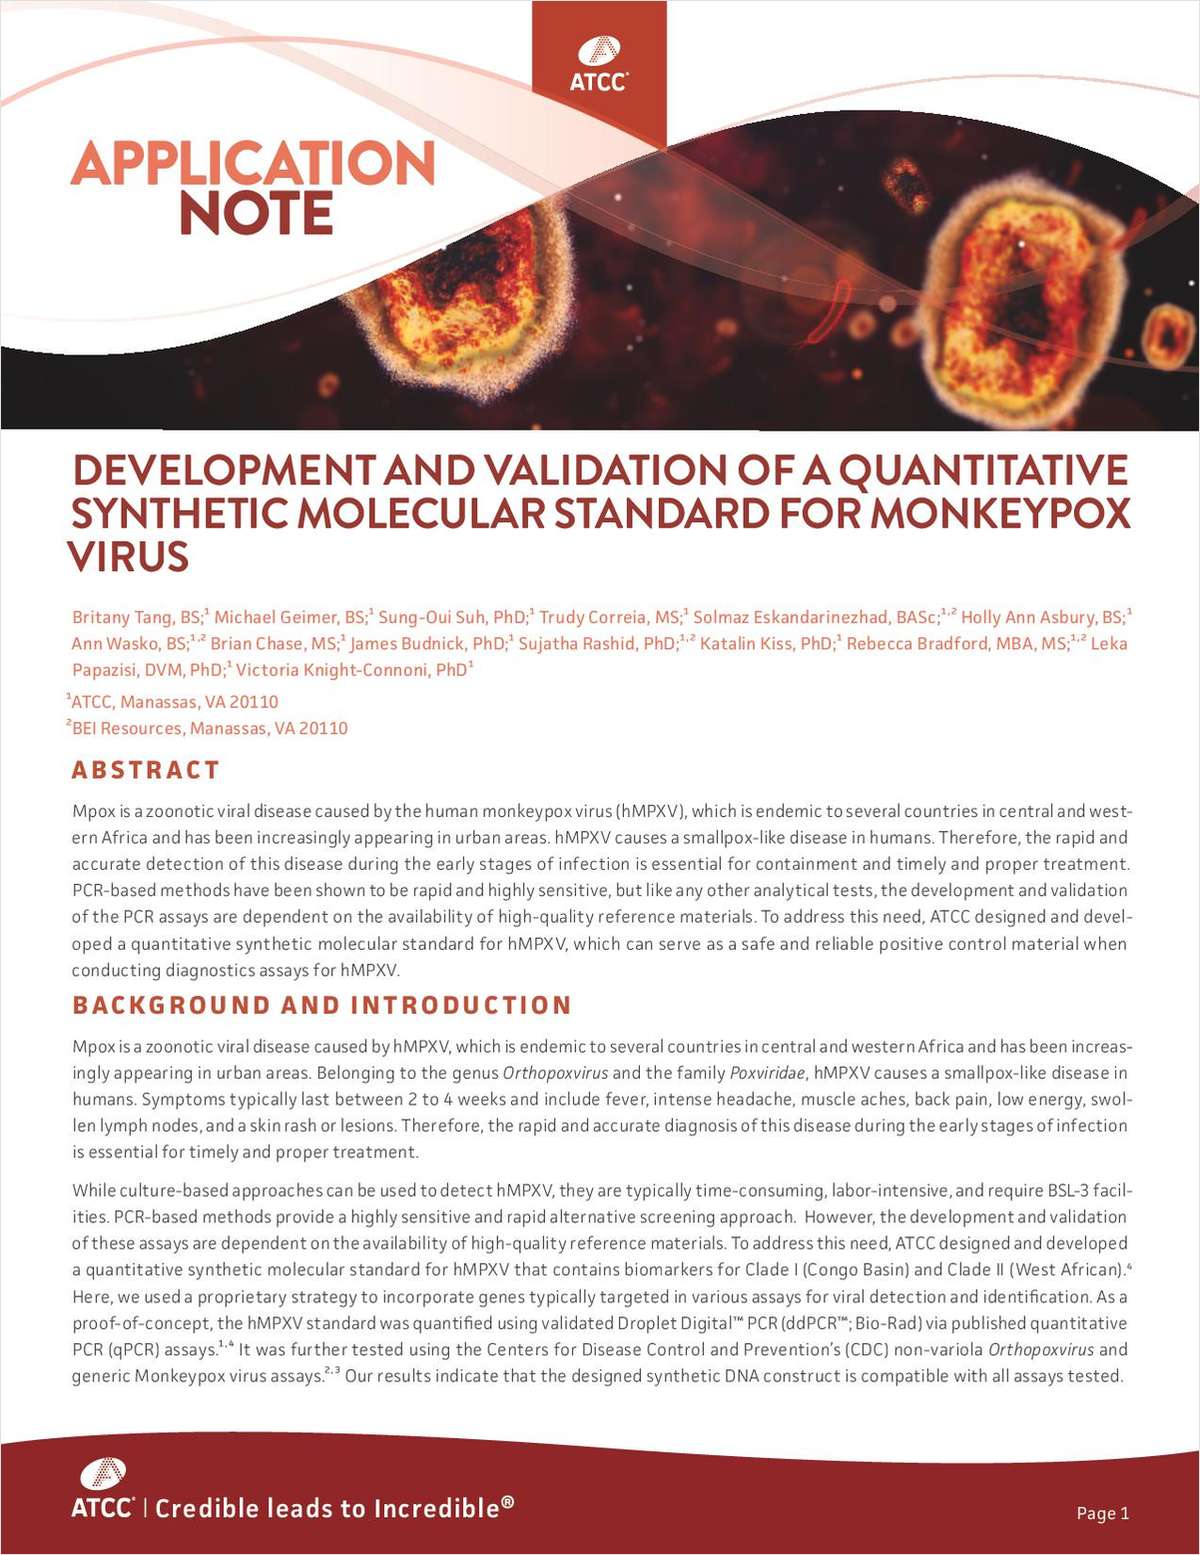 Development and Validation of a Quantitative Synthetic Molecular Standard for Monkeypox Virus